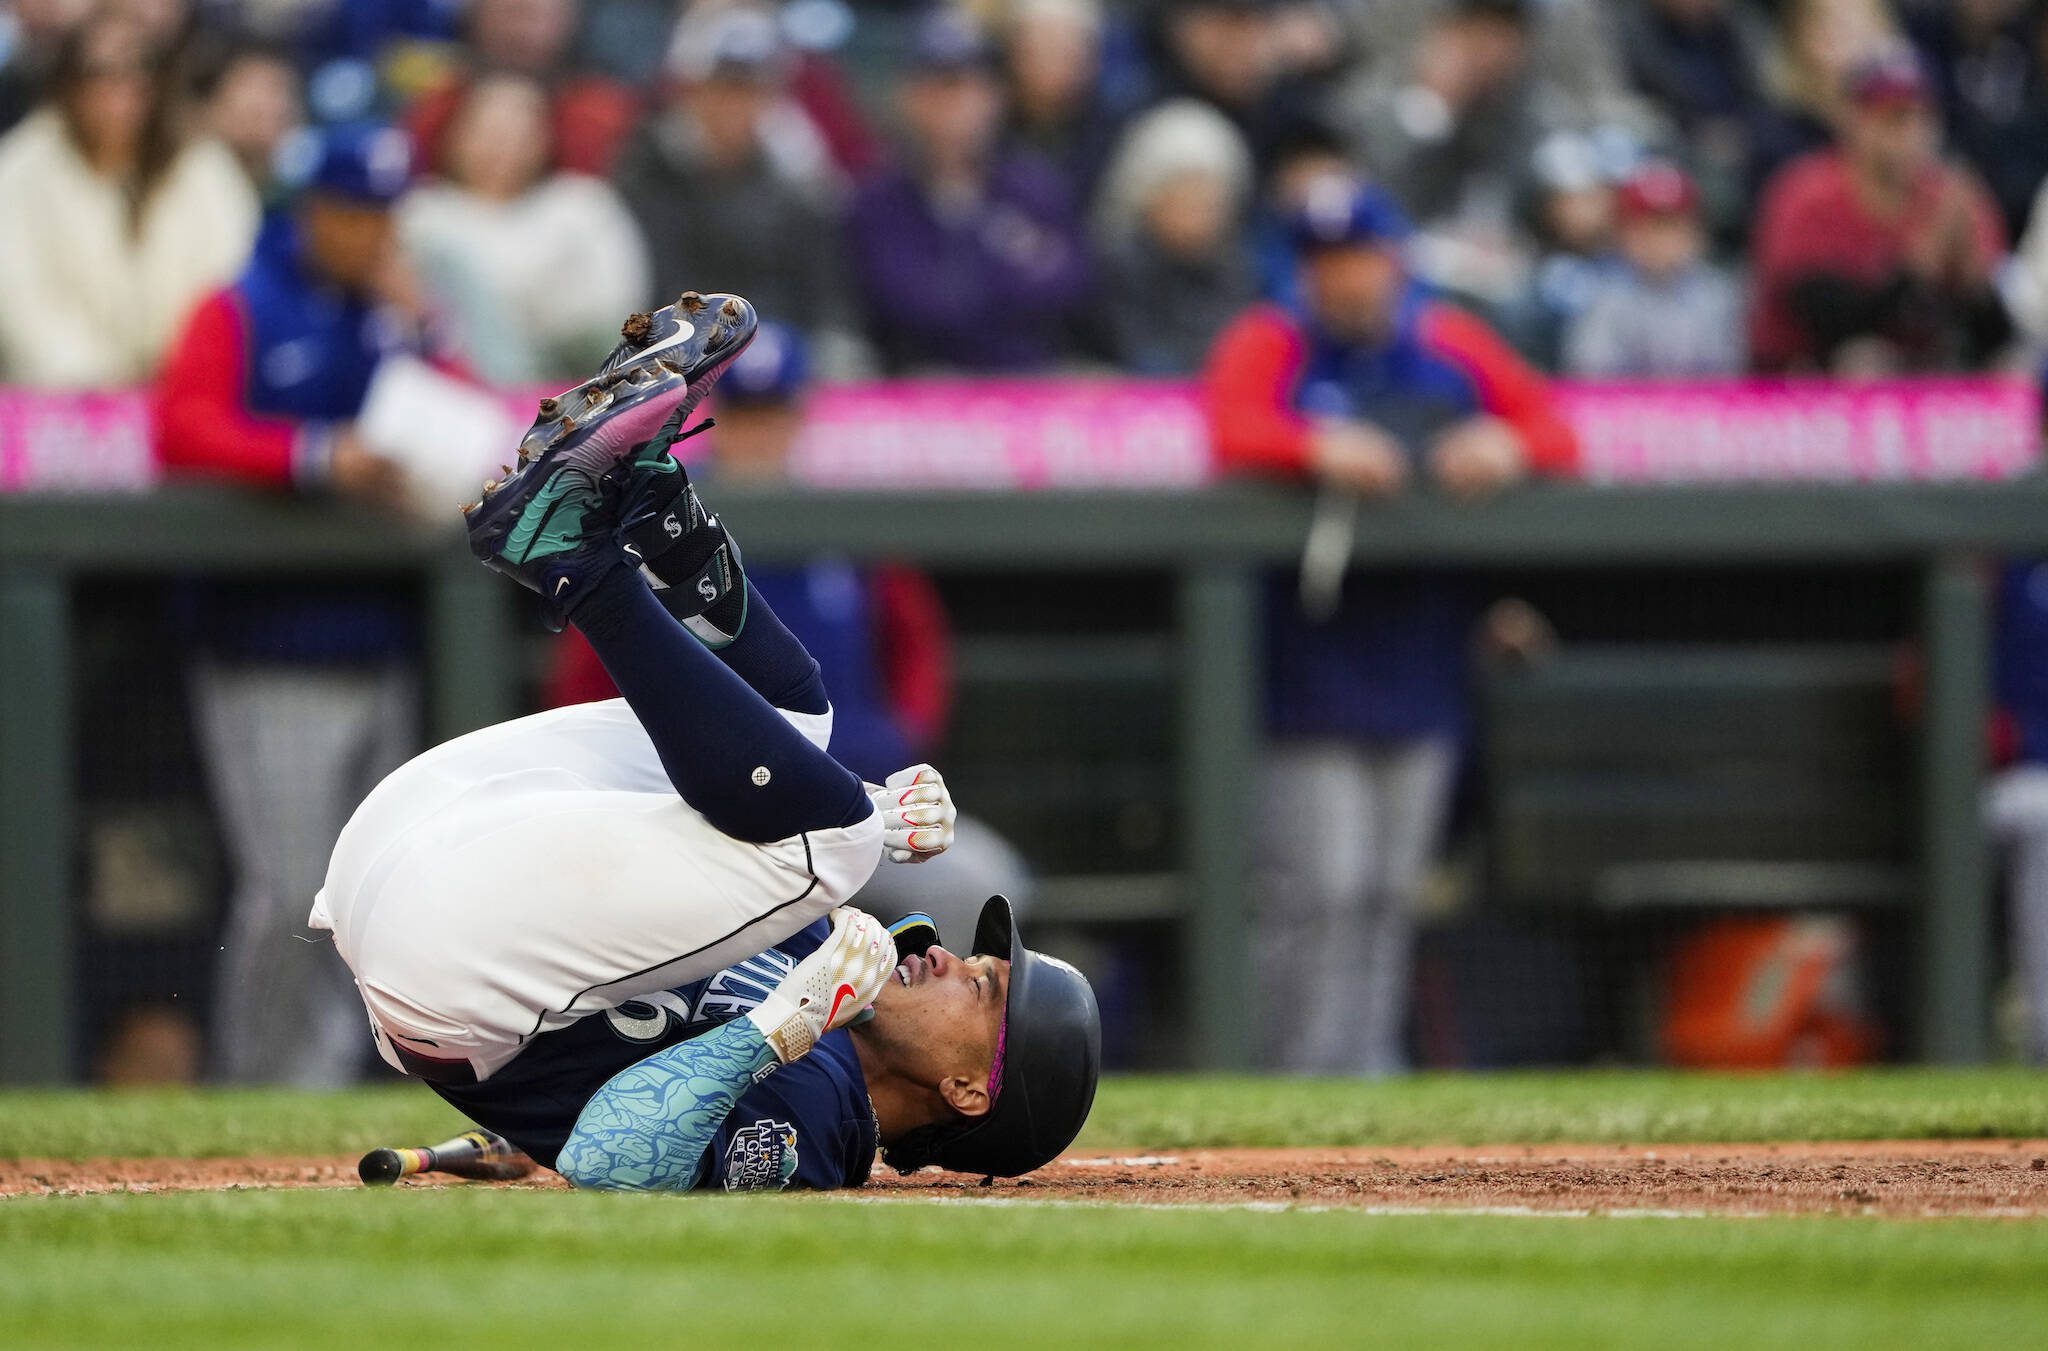 The Mariners’ Kolten Wong falls on the ground after being hit by a pitch by Rangers starting pitcher Jon Gray during the fifth inning of a game Monday in Seattle. (AP Photo/Lindsey Wasson)